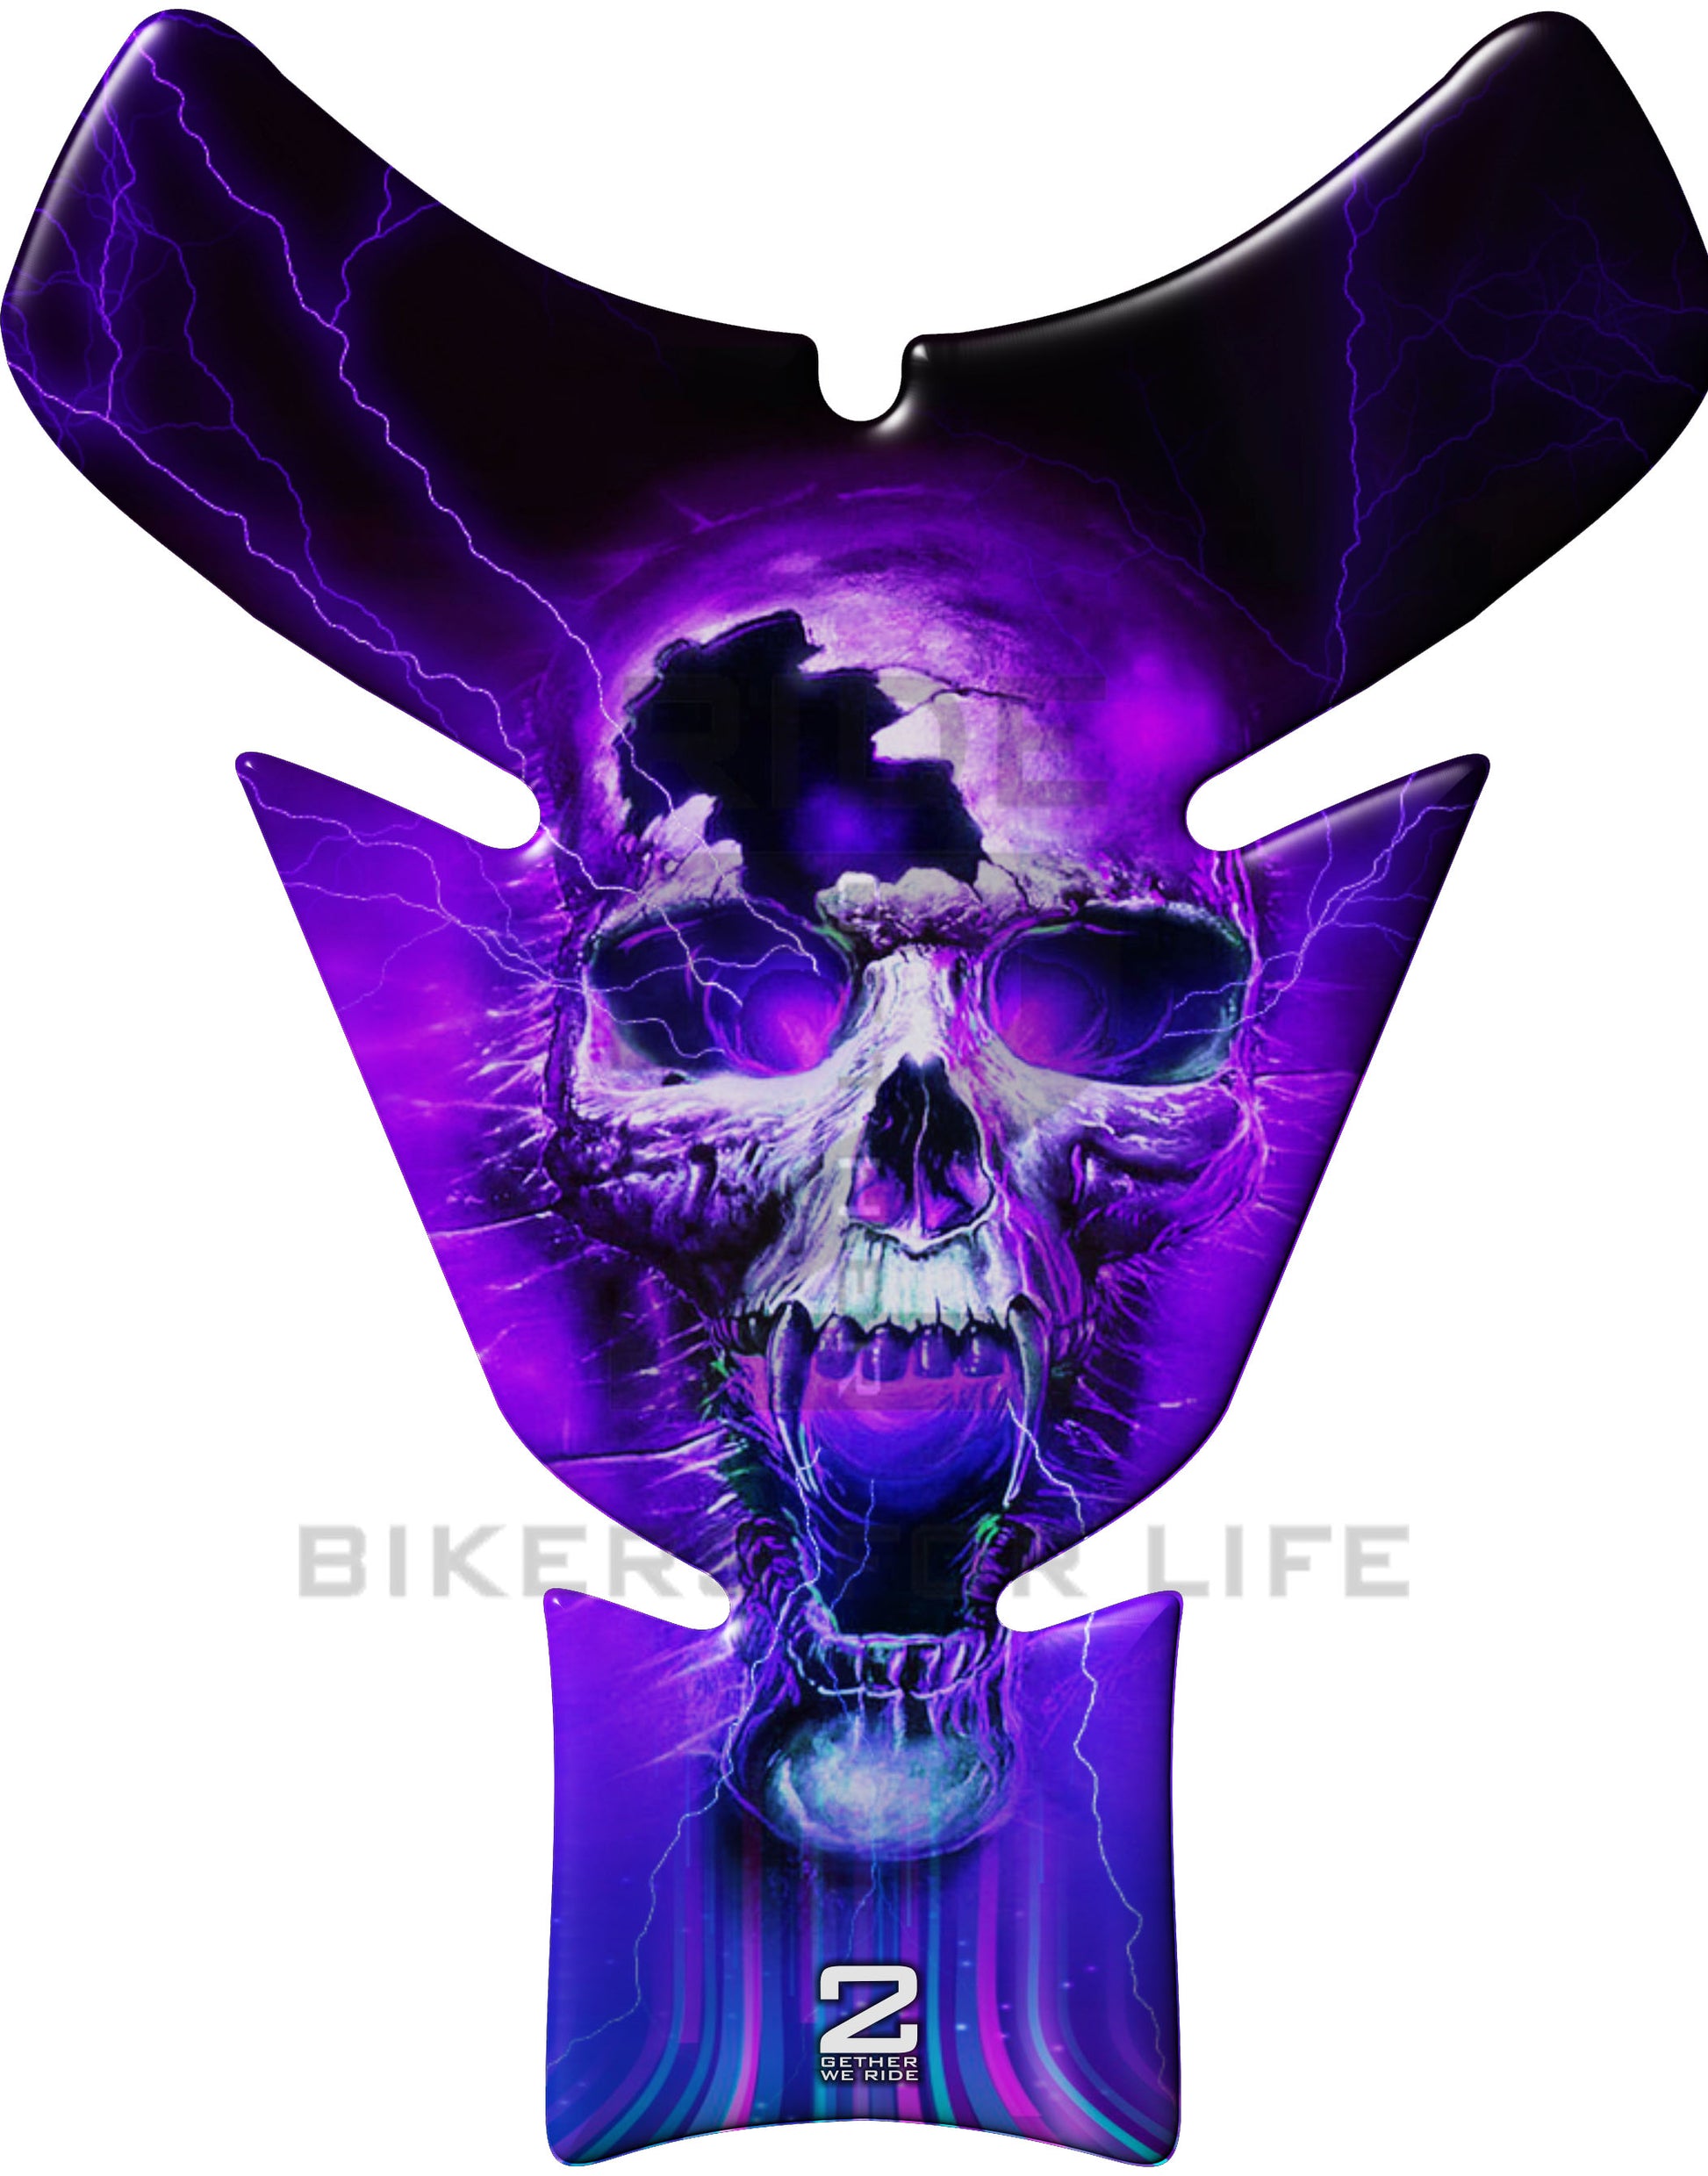 Universal Fit Blue and Purple Skull Motor Bike Tank Pad Protector. A Street Pad which fits most motorcycles.